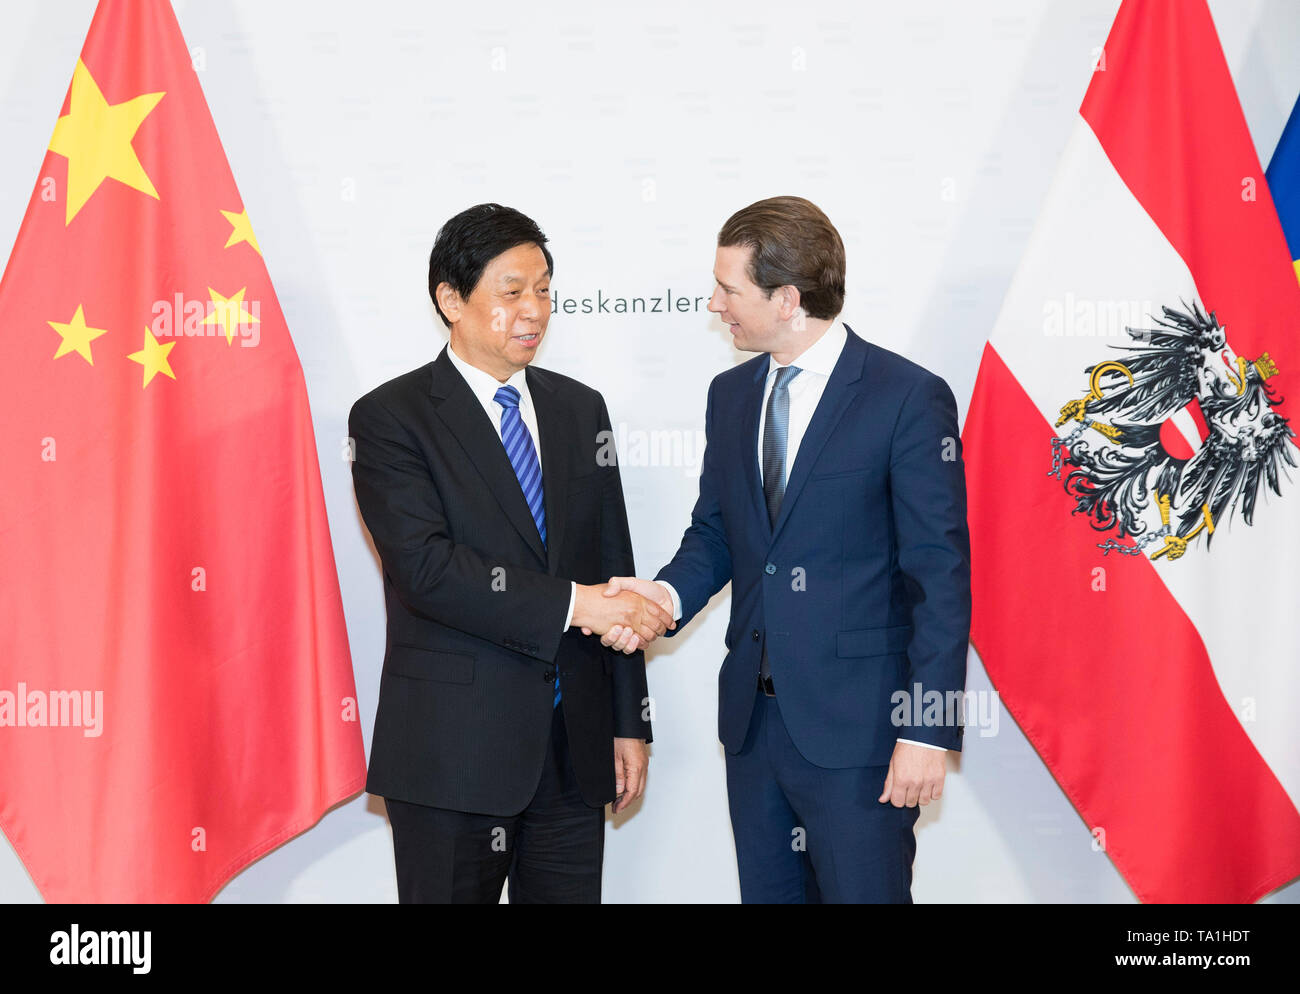 Vienna, Austria. 21st May, 2019. Li Zhanshu (L), chairman of the Standing Committee of the National People's Congress (NPC), meets with Austrian Chancellor Sebastian Kurz in Vienna, Austria, on May 21, 2019. China's top legislator Li Zhanshu paid an official friendly visit from May 18 to 21 to Austria, where he met with Austrian leaders on promoting bilateral ties and expressed China's stance on upholding multilateralism and free trade. Credit: Huang Jingwen/Xinhua/Alamy Live News Stock Photo